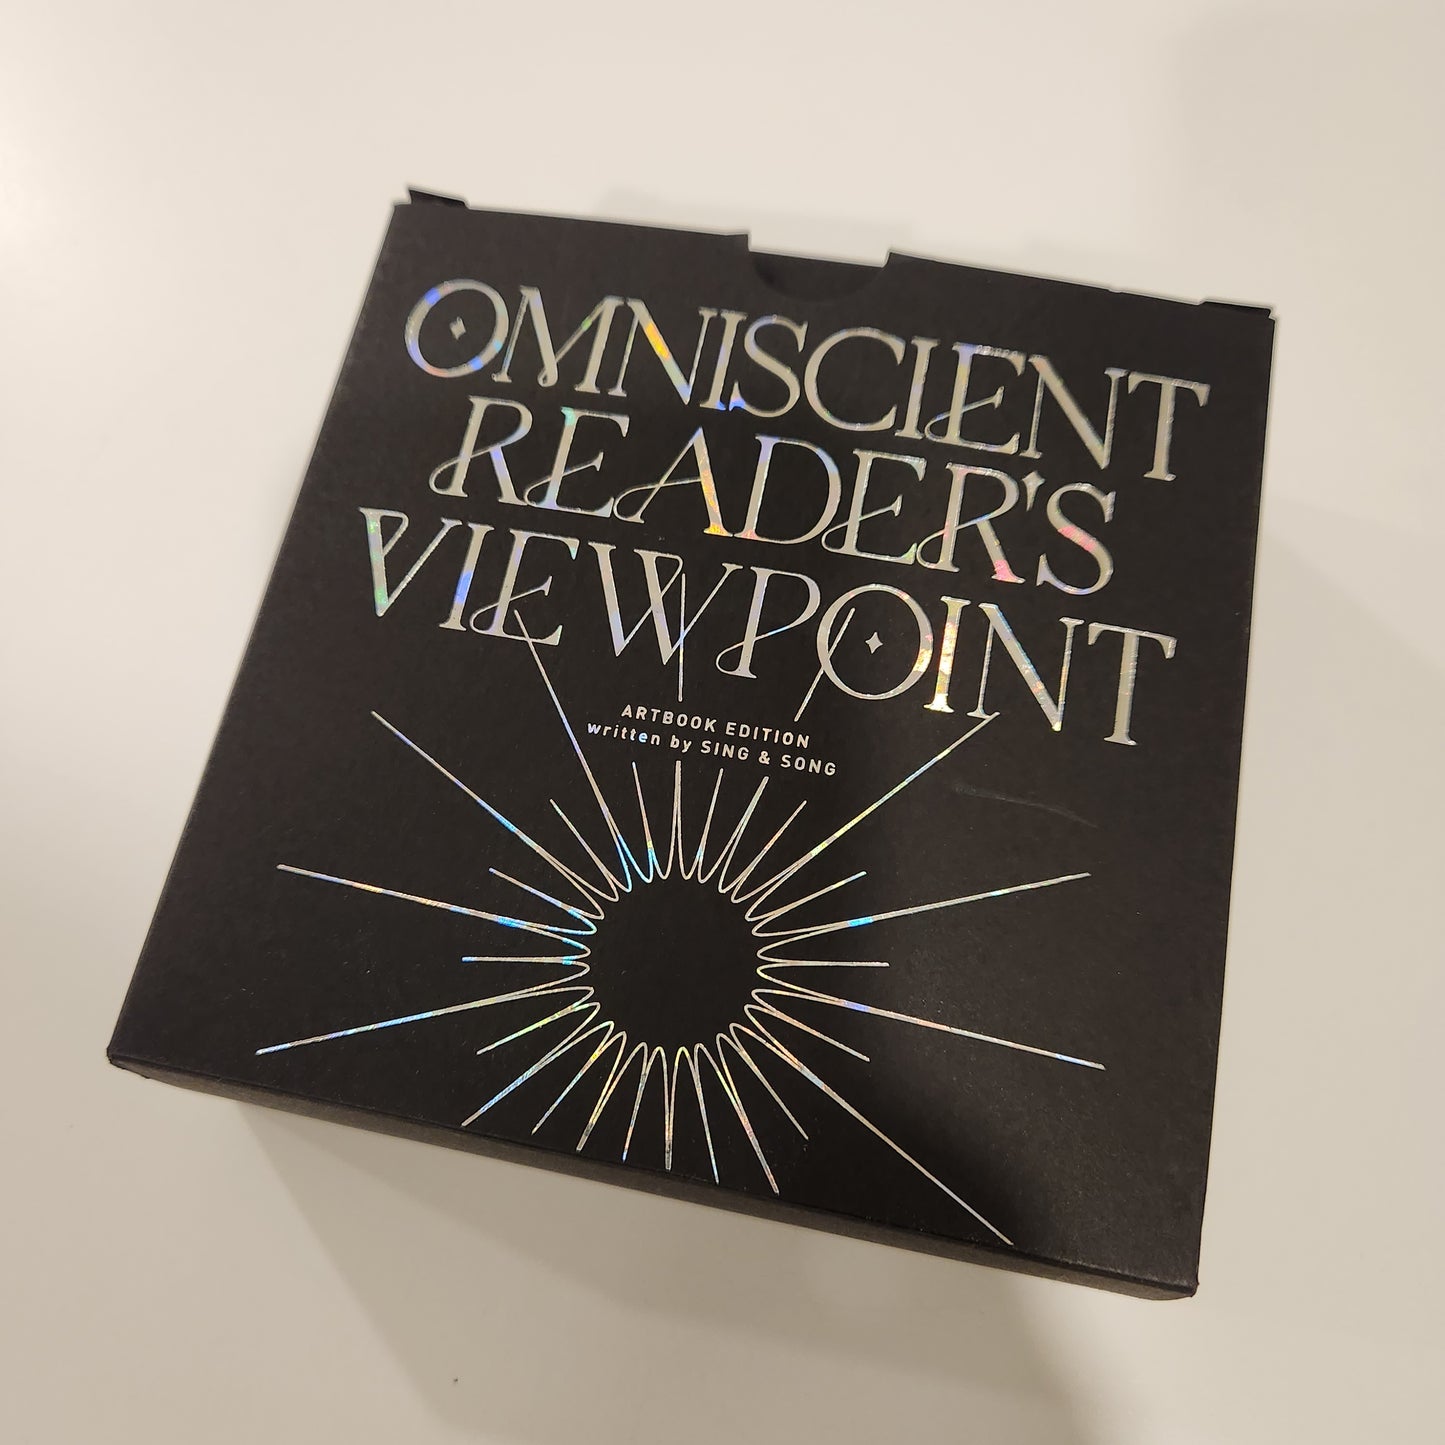 [tear on box / no use the pocket watch] Omniscient Reader's Viewpoint Pocket Watch